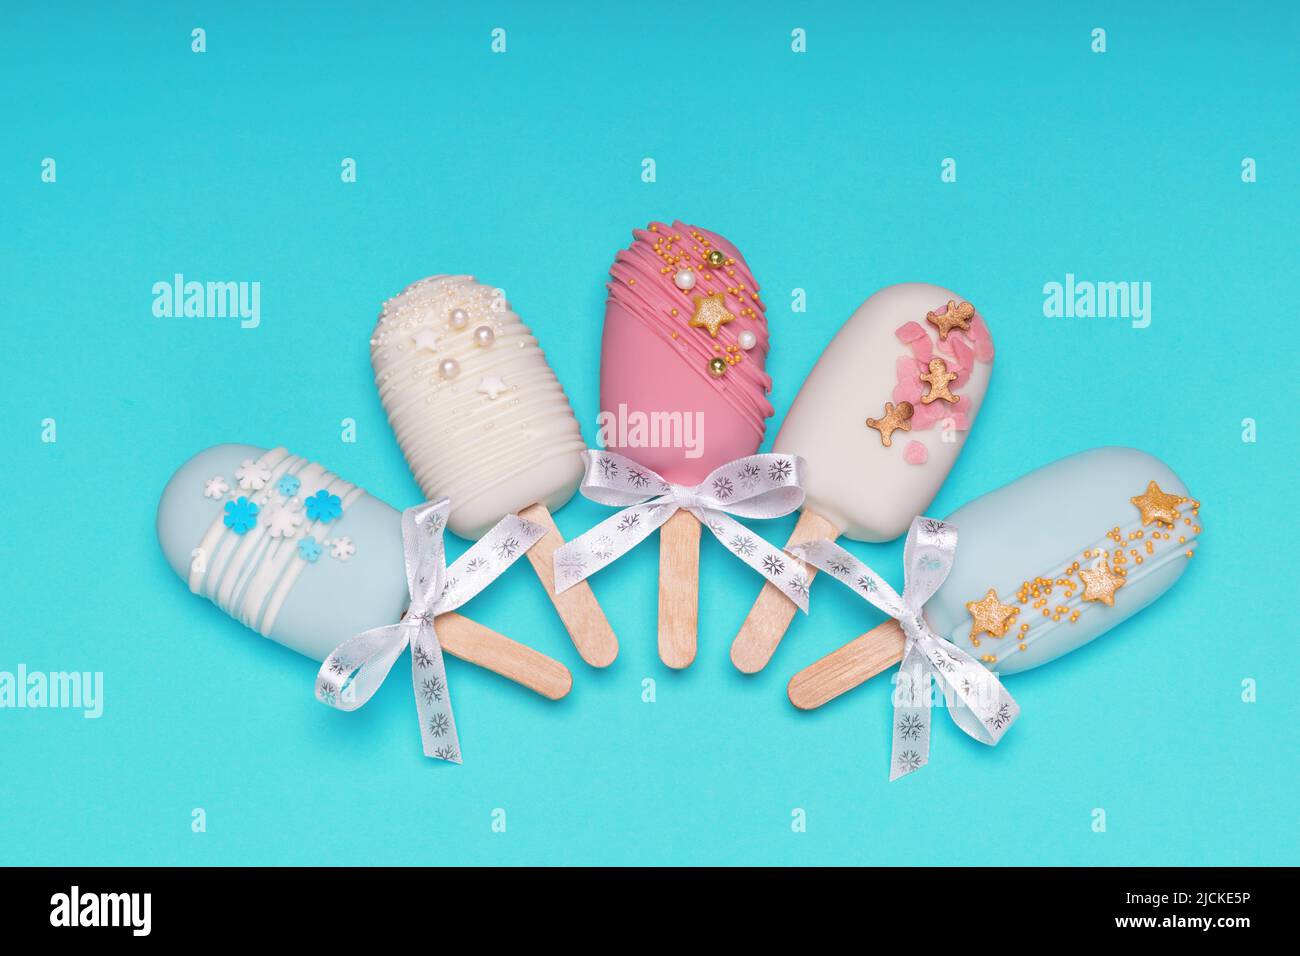 top view of decorated cake pops ice creams on turquoise background Stock Photo